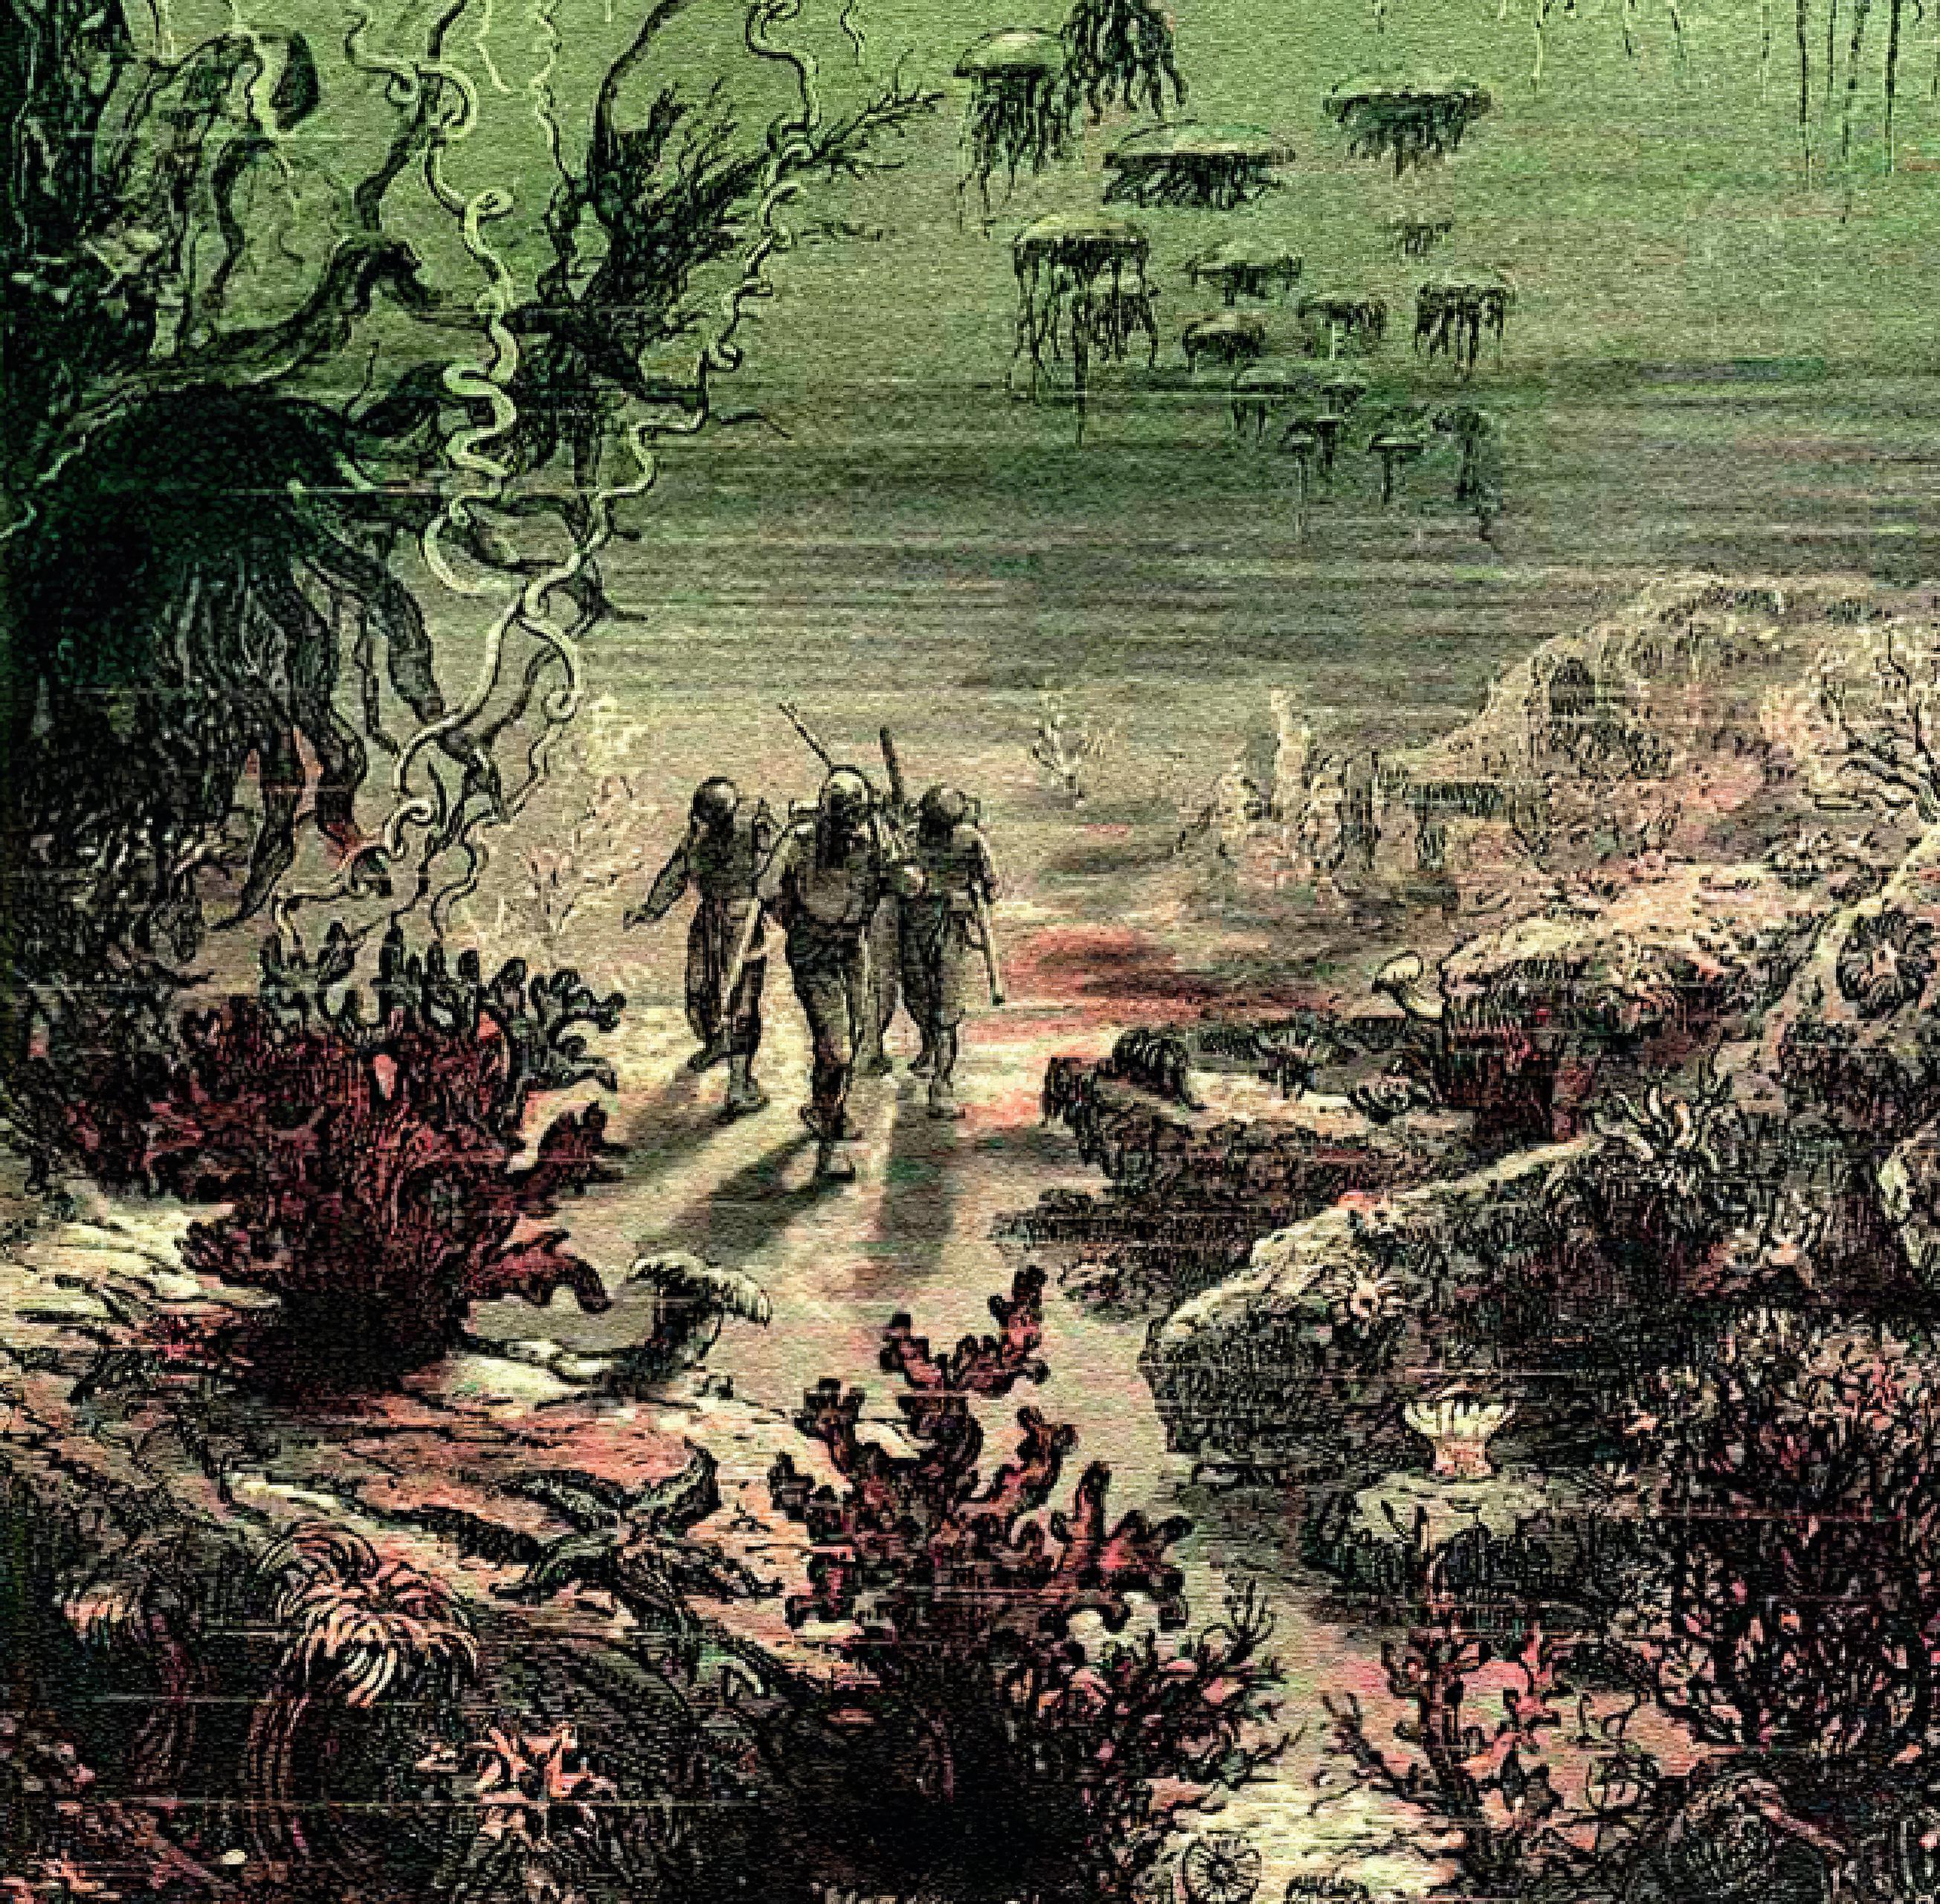 Book 20000 Leagues Under the Sea in German